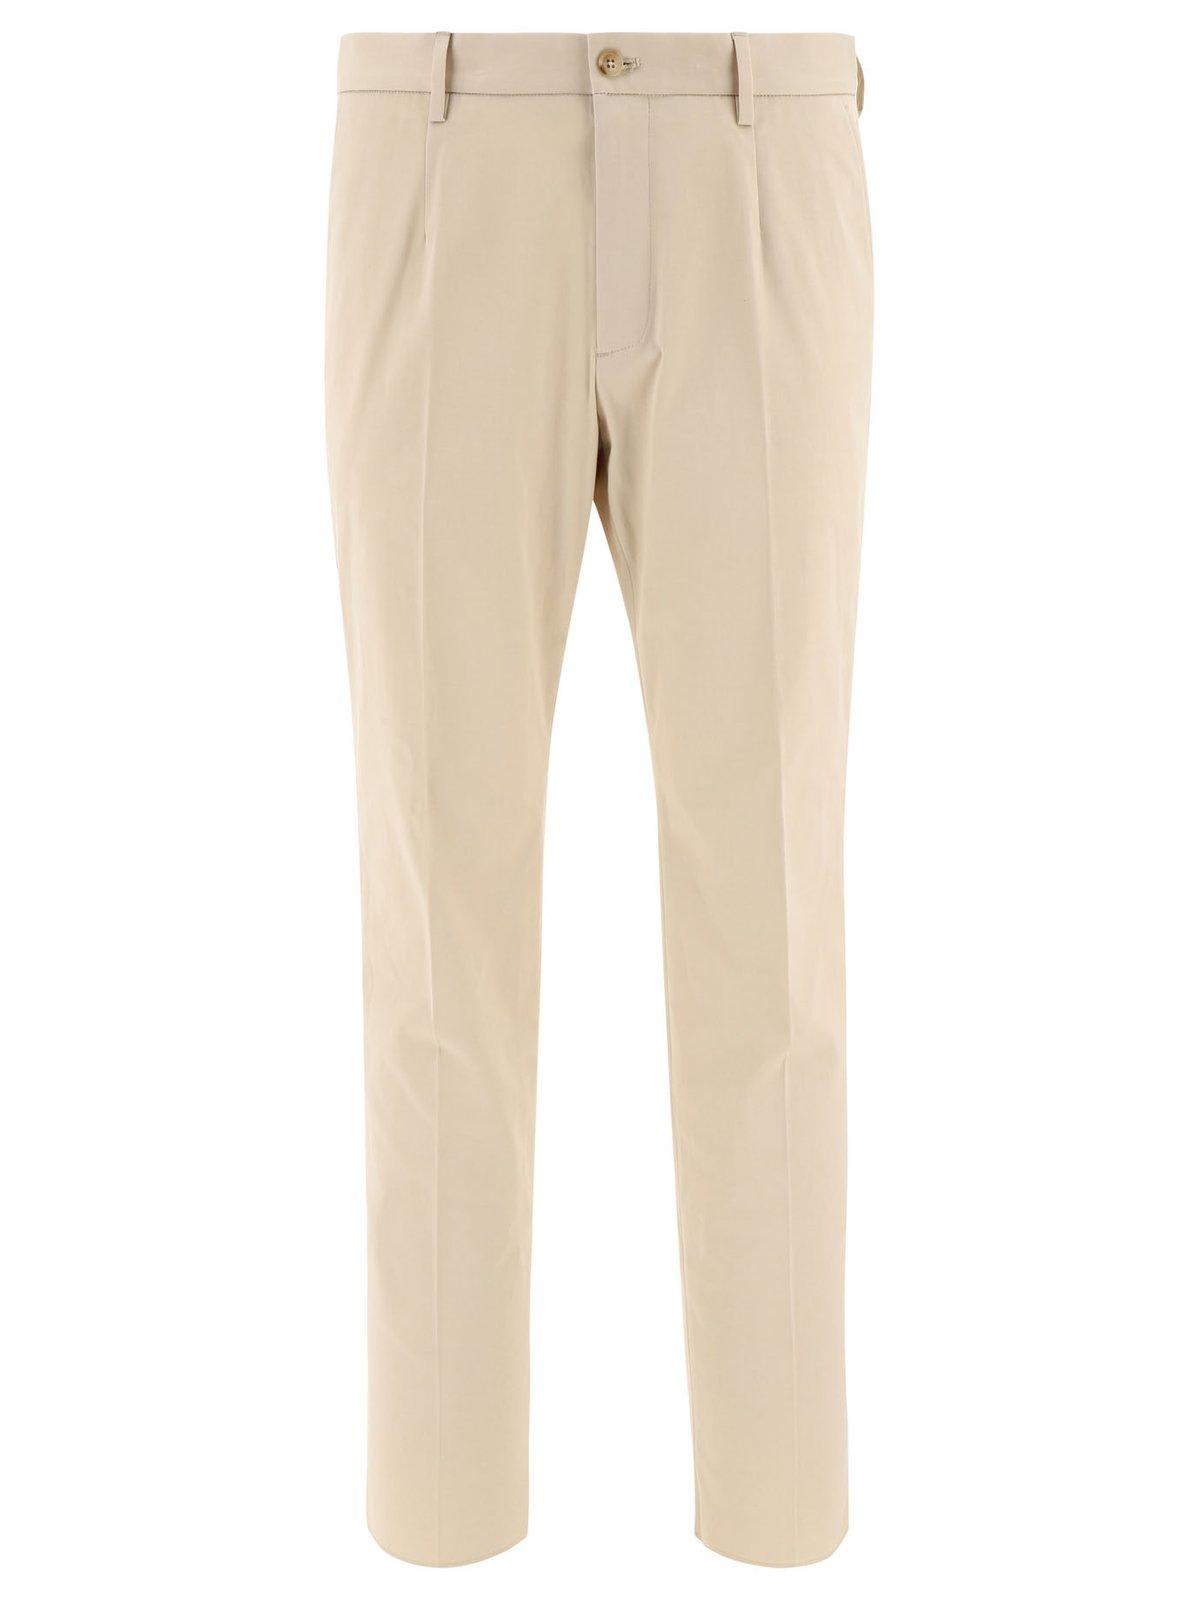 DOLCE & GABBANA LOGO PATCH TAILORED TROUSERS